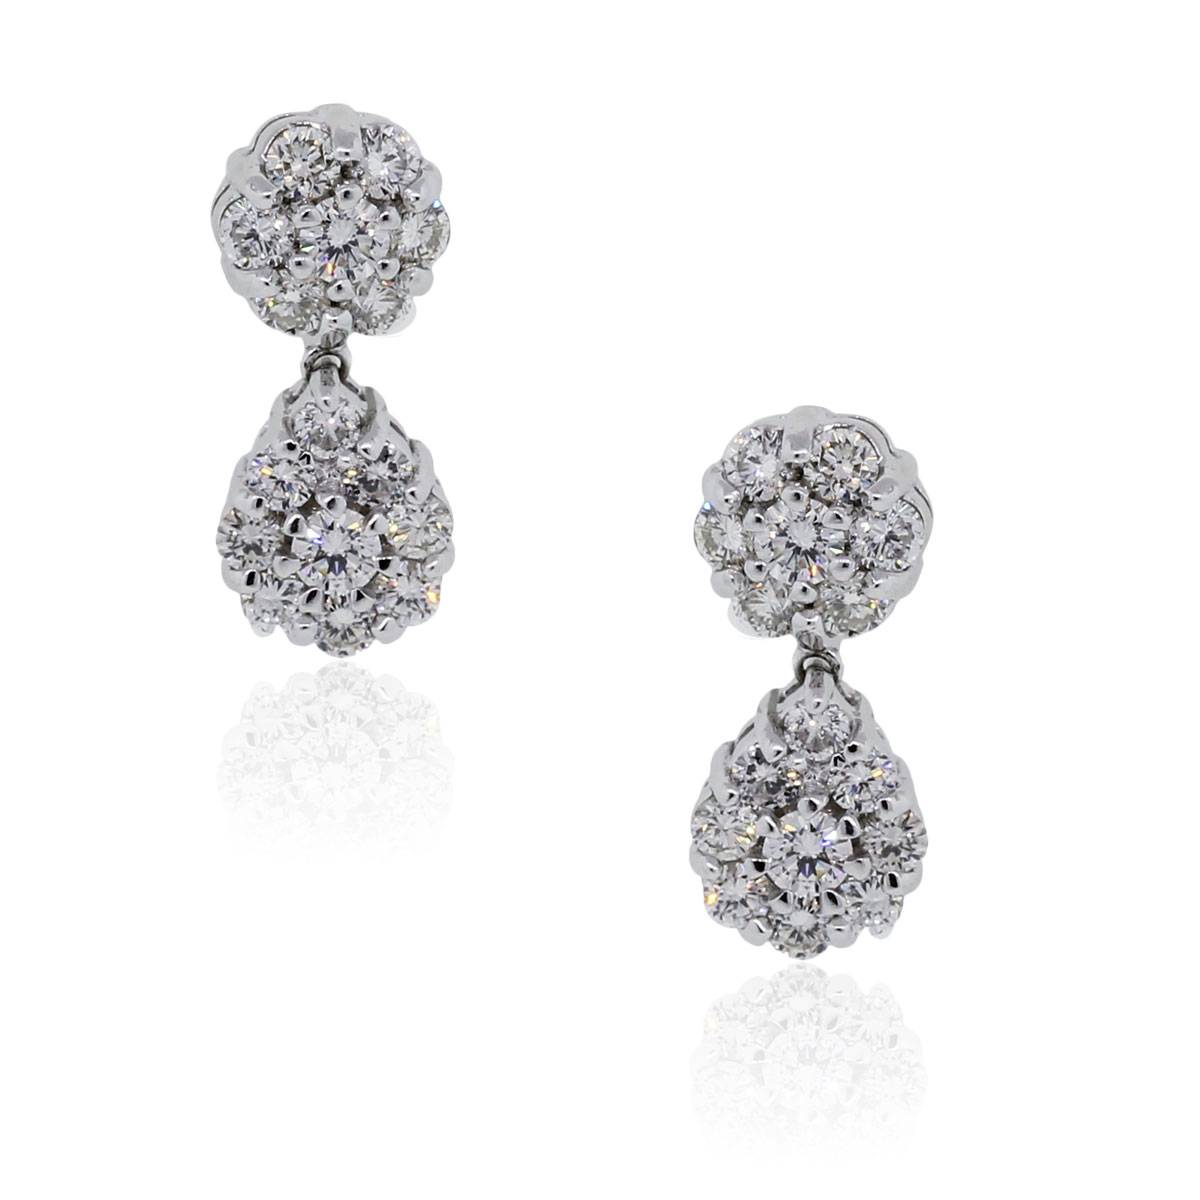 Women's Alloy Earring in Gold and WhiteGold | Alloy earrings, Online  earrings, Designer earrings